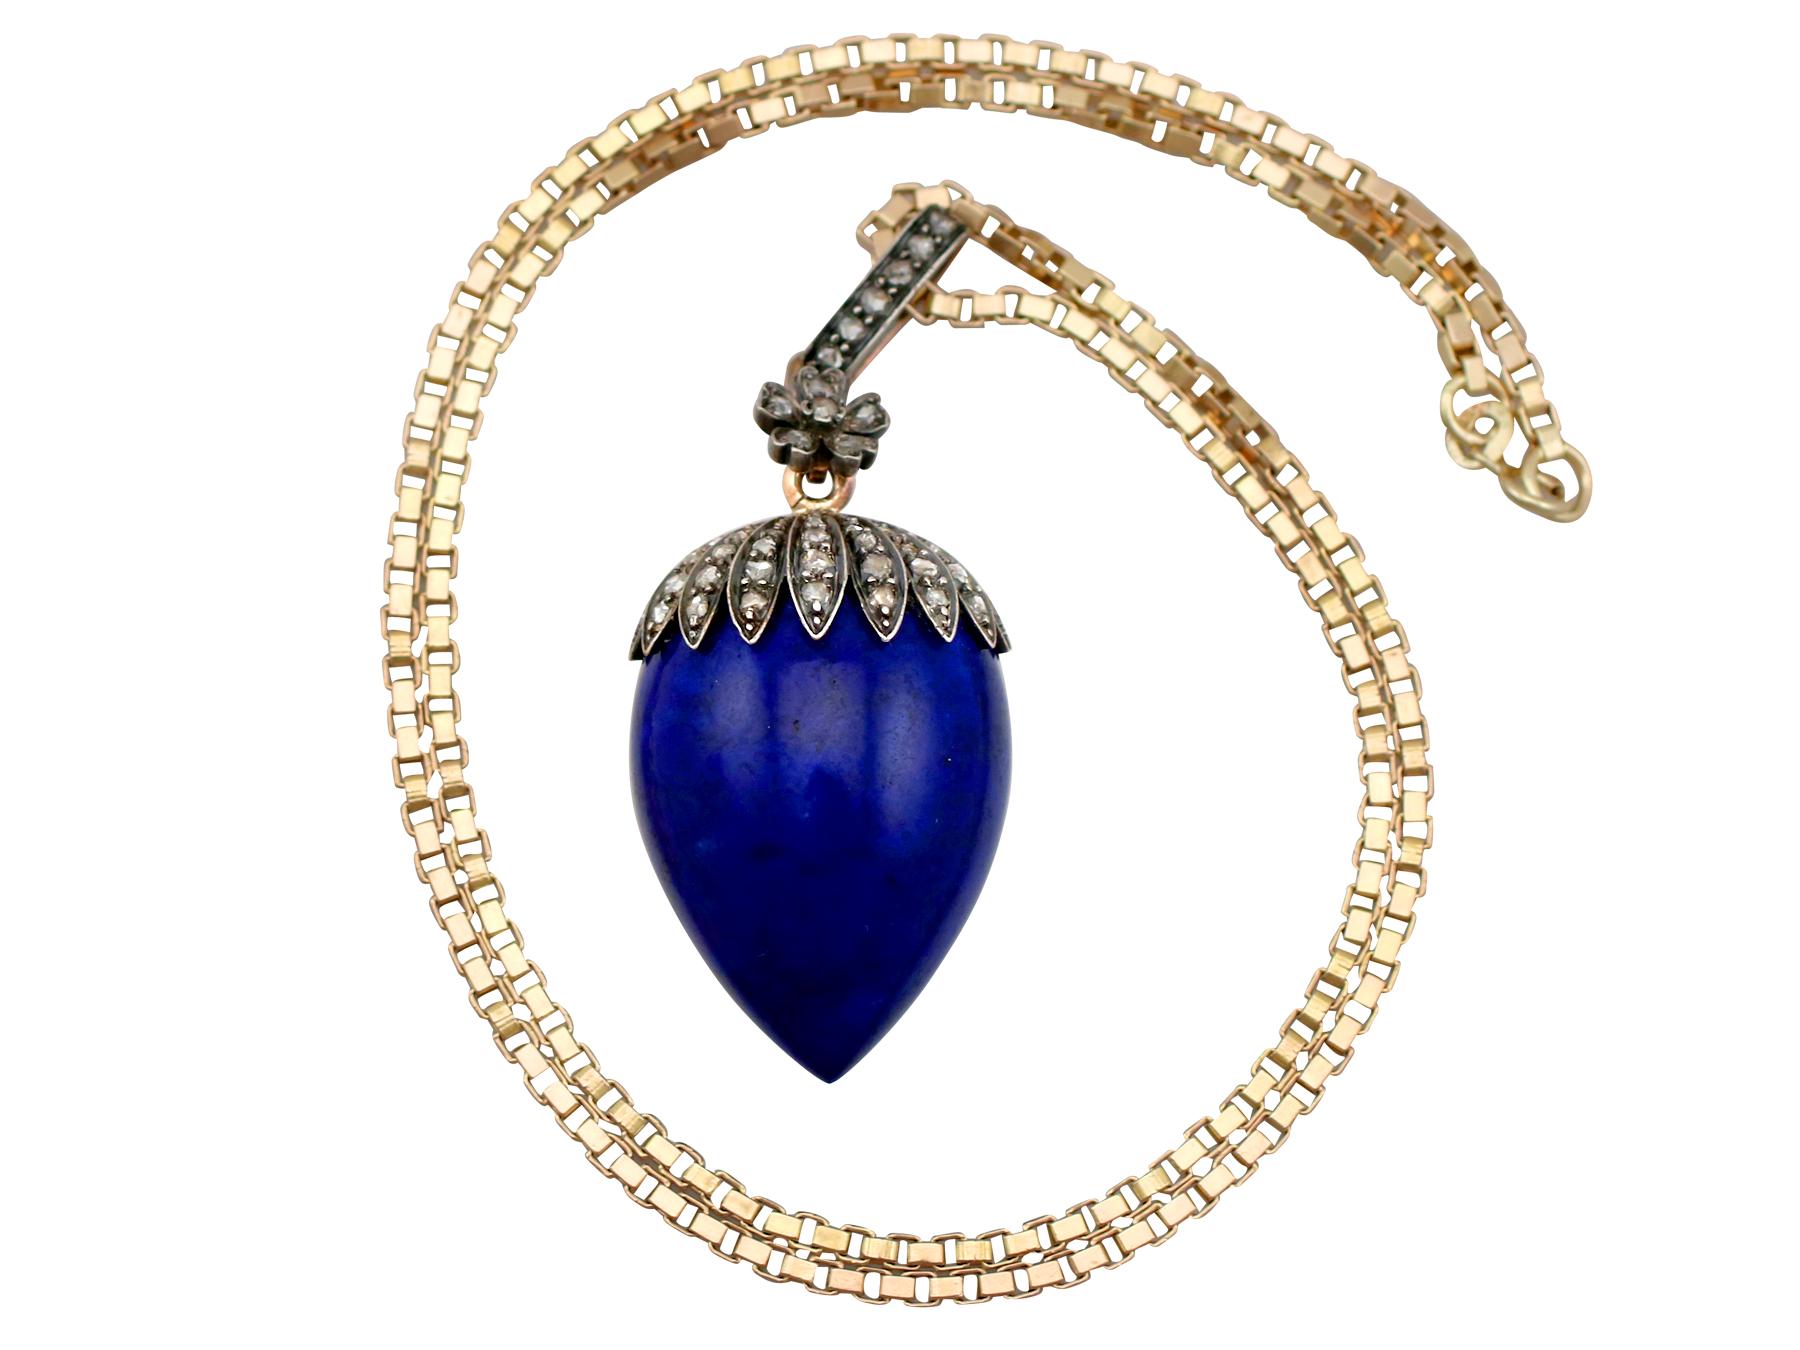 A stunning antique French lapis lazuli and 1.02 carat diamond, 18 karat rose gold and silver set pendant / locket; part of our diverse antique jewelry collections.

This stunning, fine and impressive antique pendant has been crafted in 18k rose gold